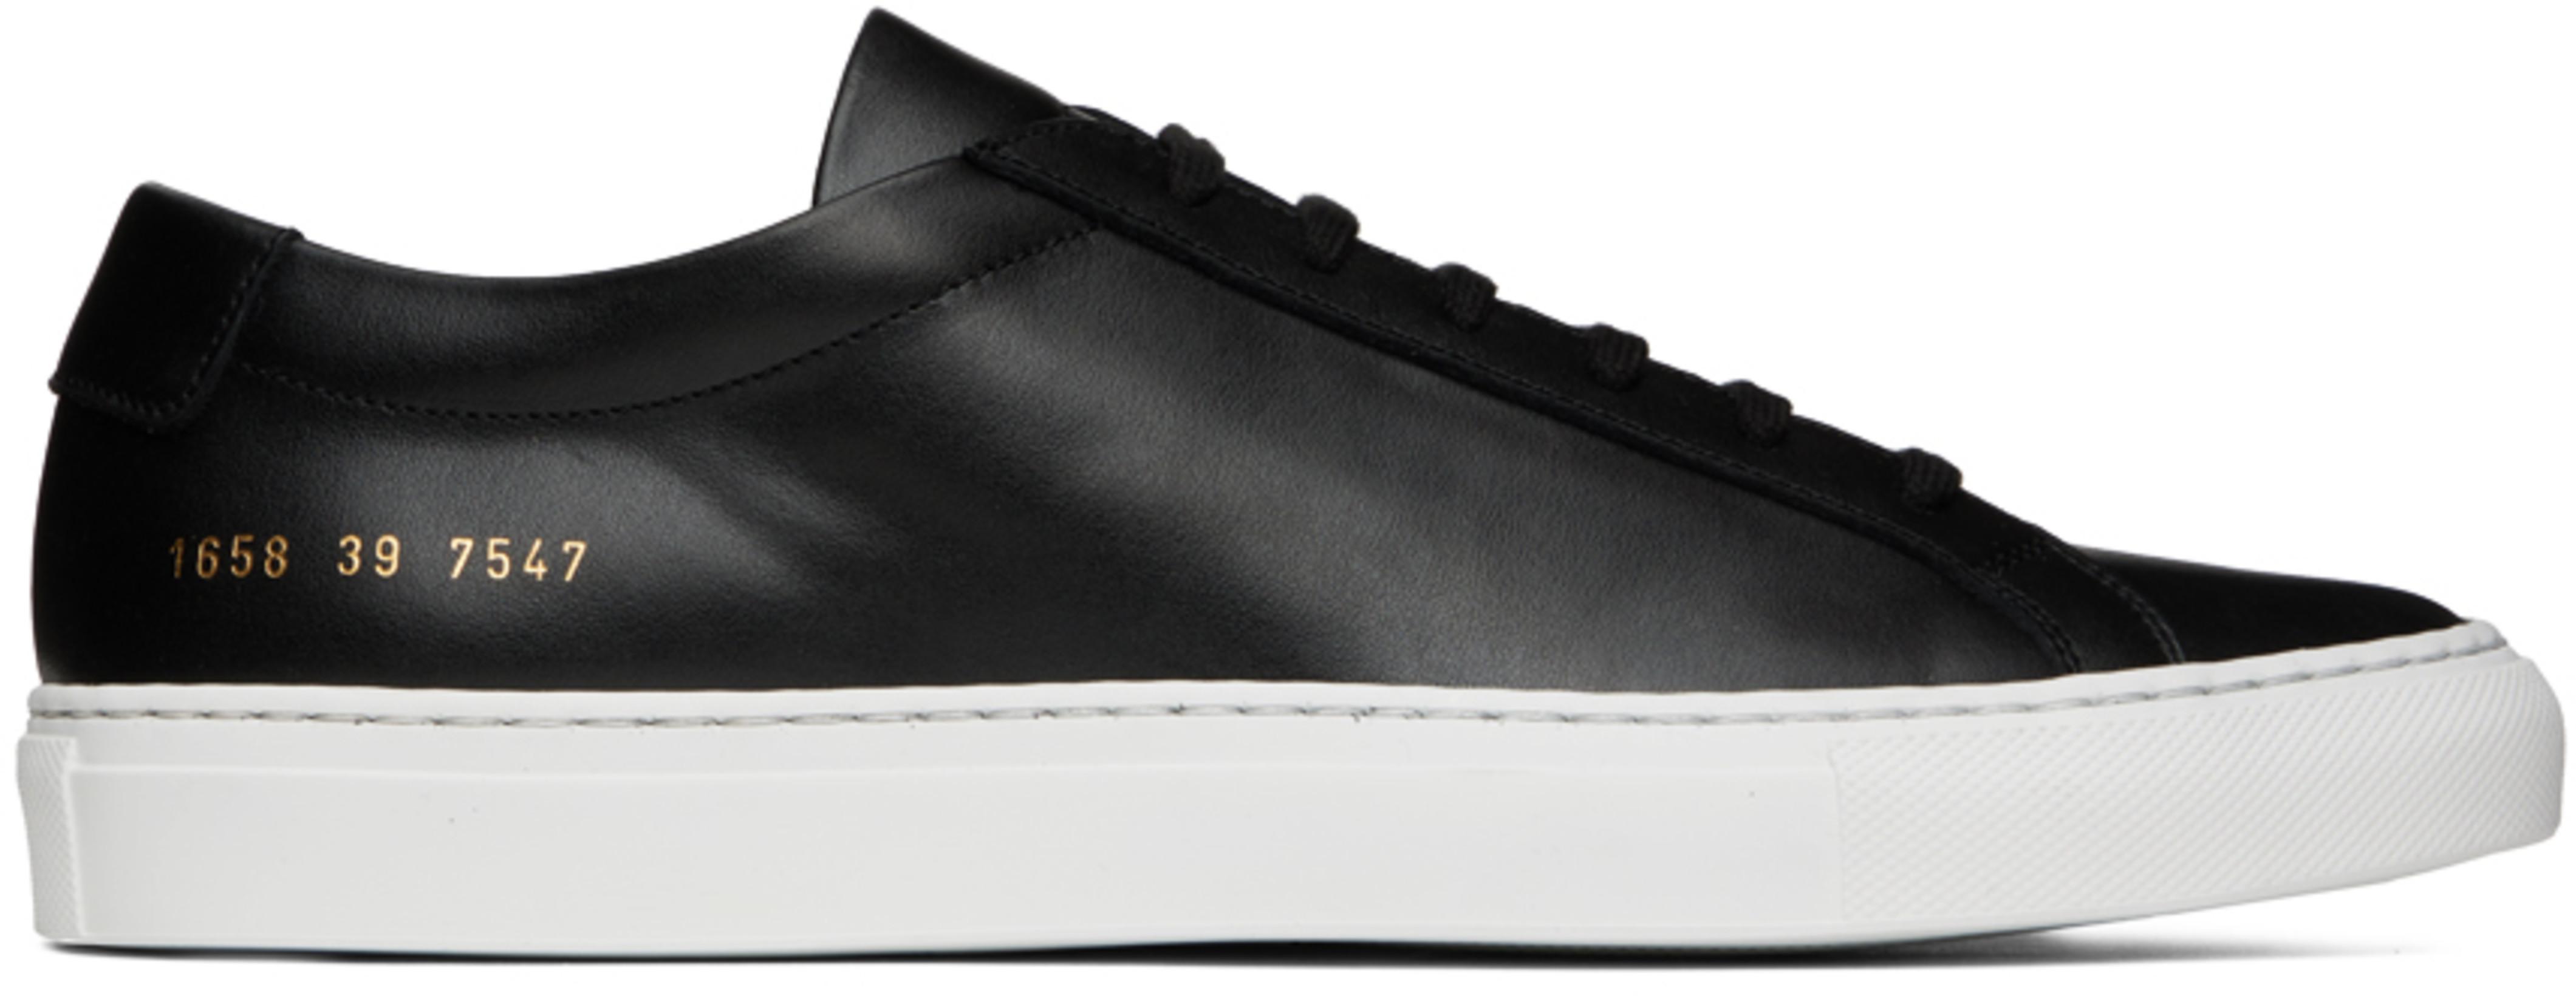 Black Achilles Low Sneakers by COMMON PROJECTS